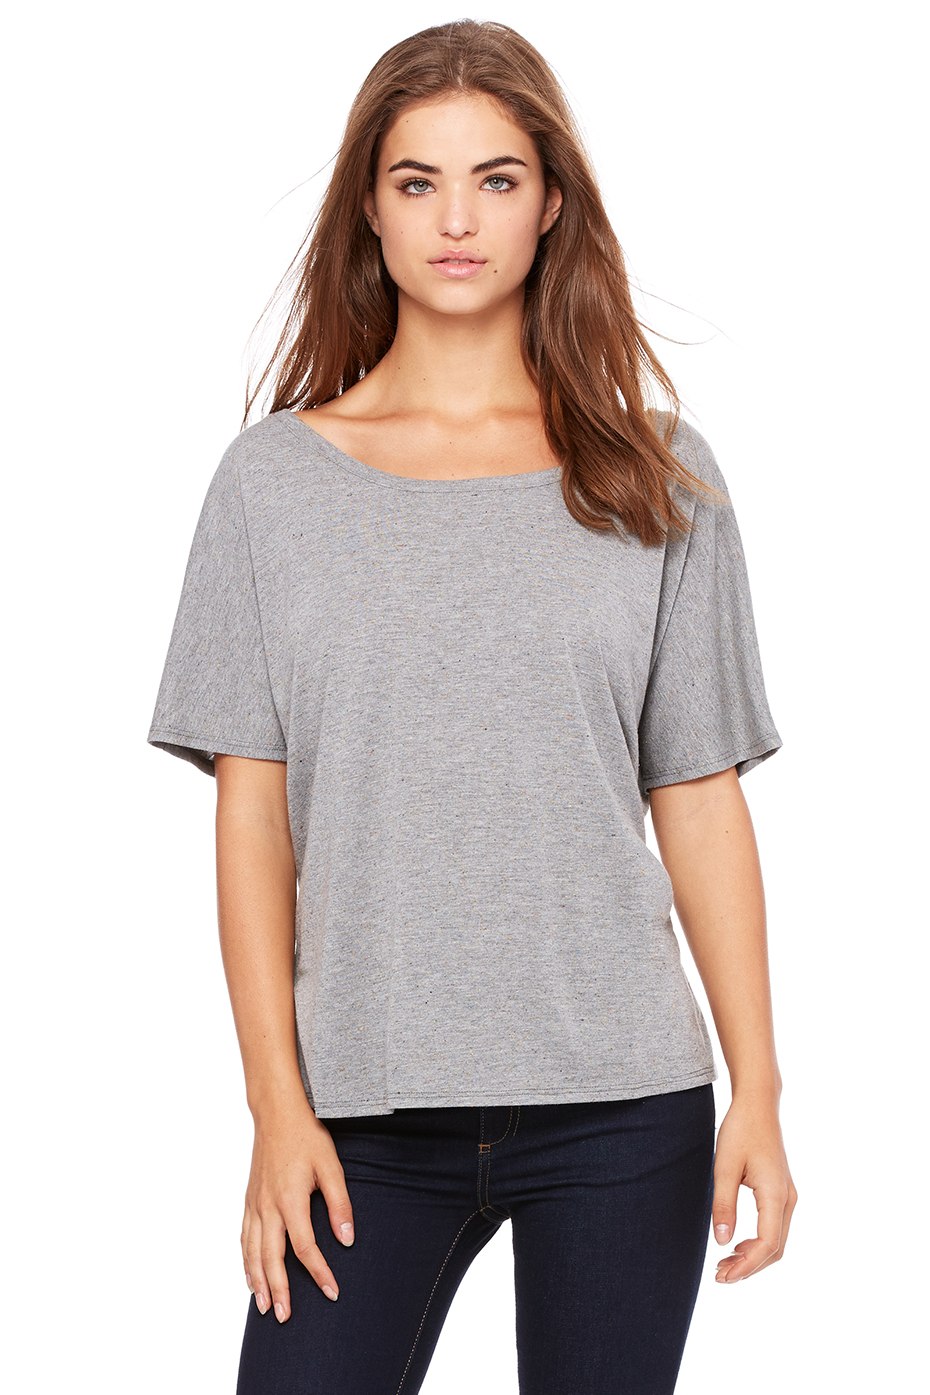 Template slouchy tee project social services inc reviews kardashian